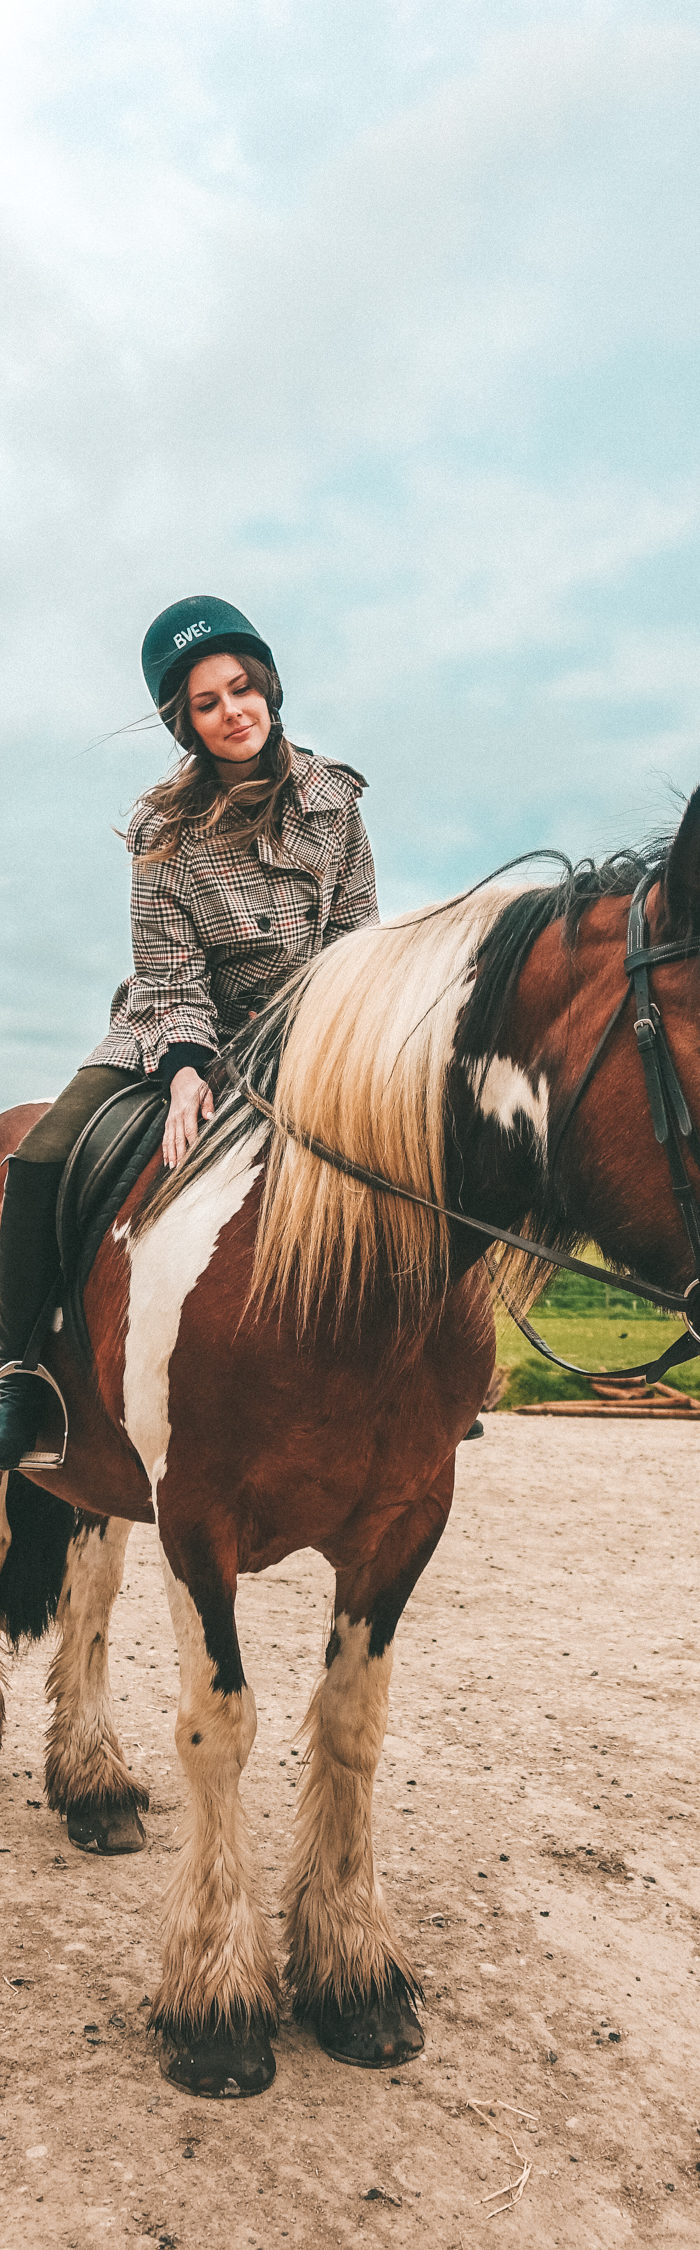 Alyssa Campanella of The A List rides horses at Bourton Vale in the Cotswolds wearing Zara plaid trench coat